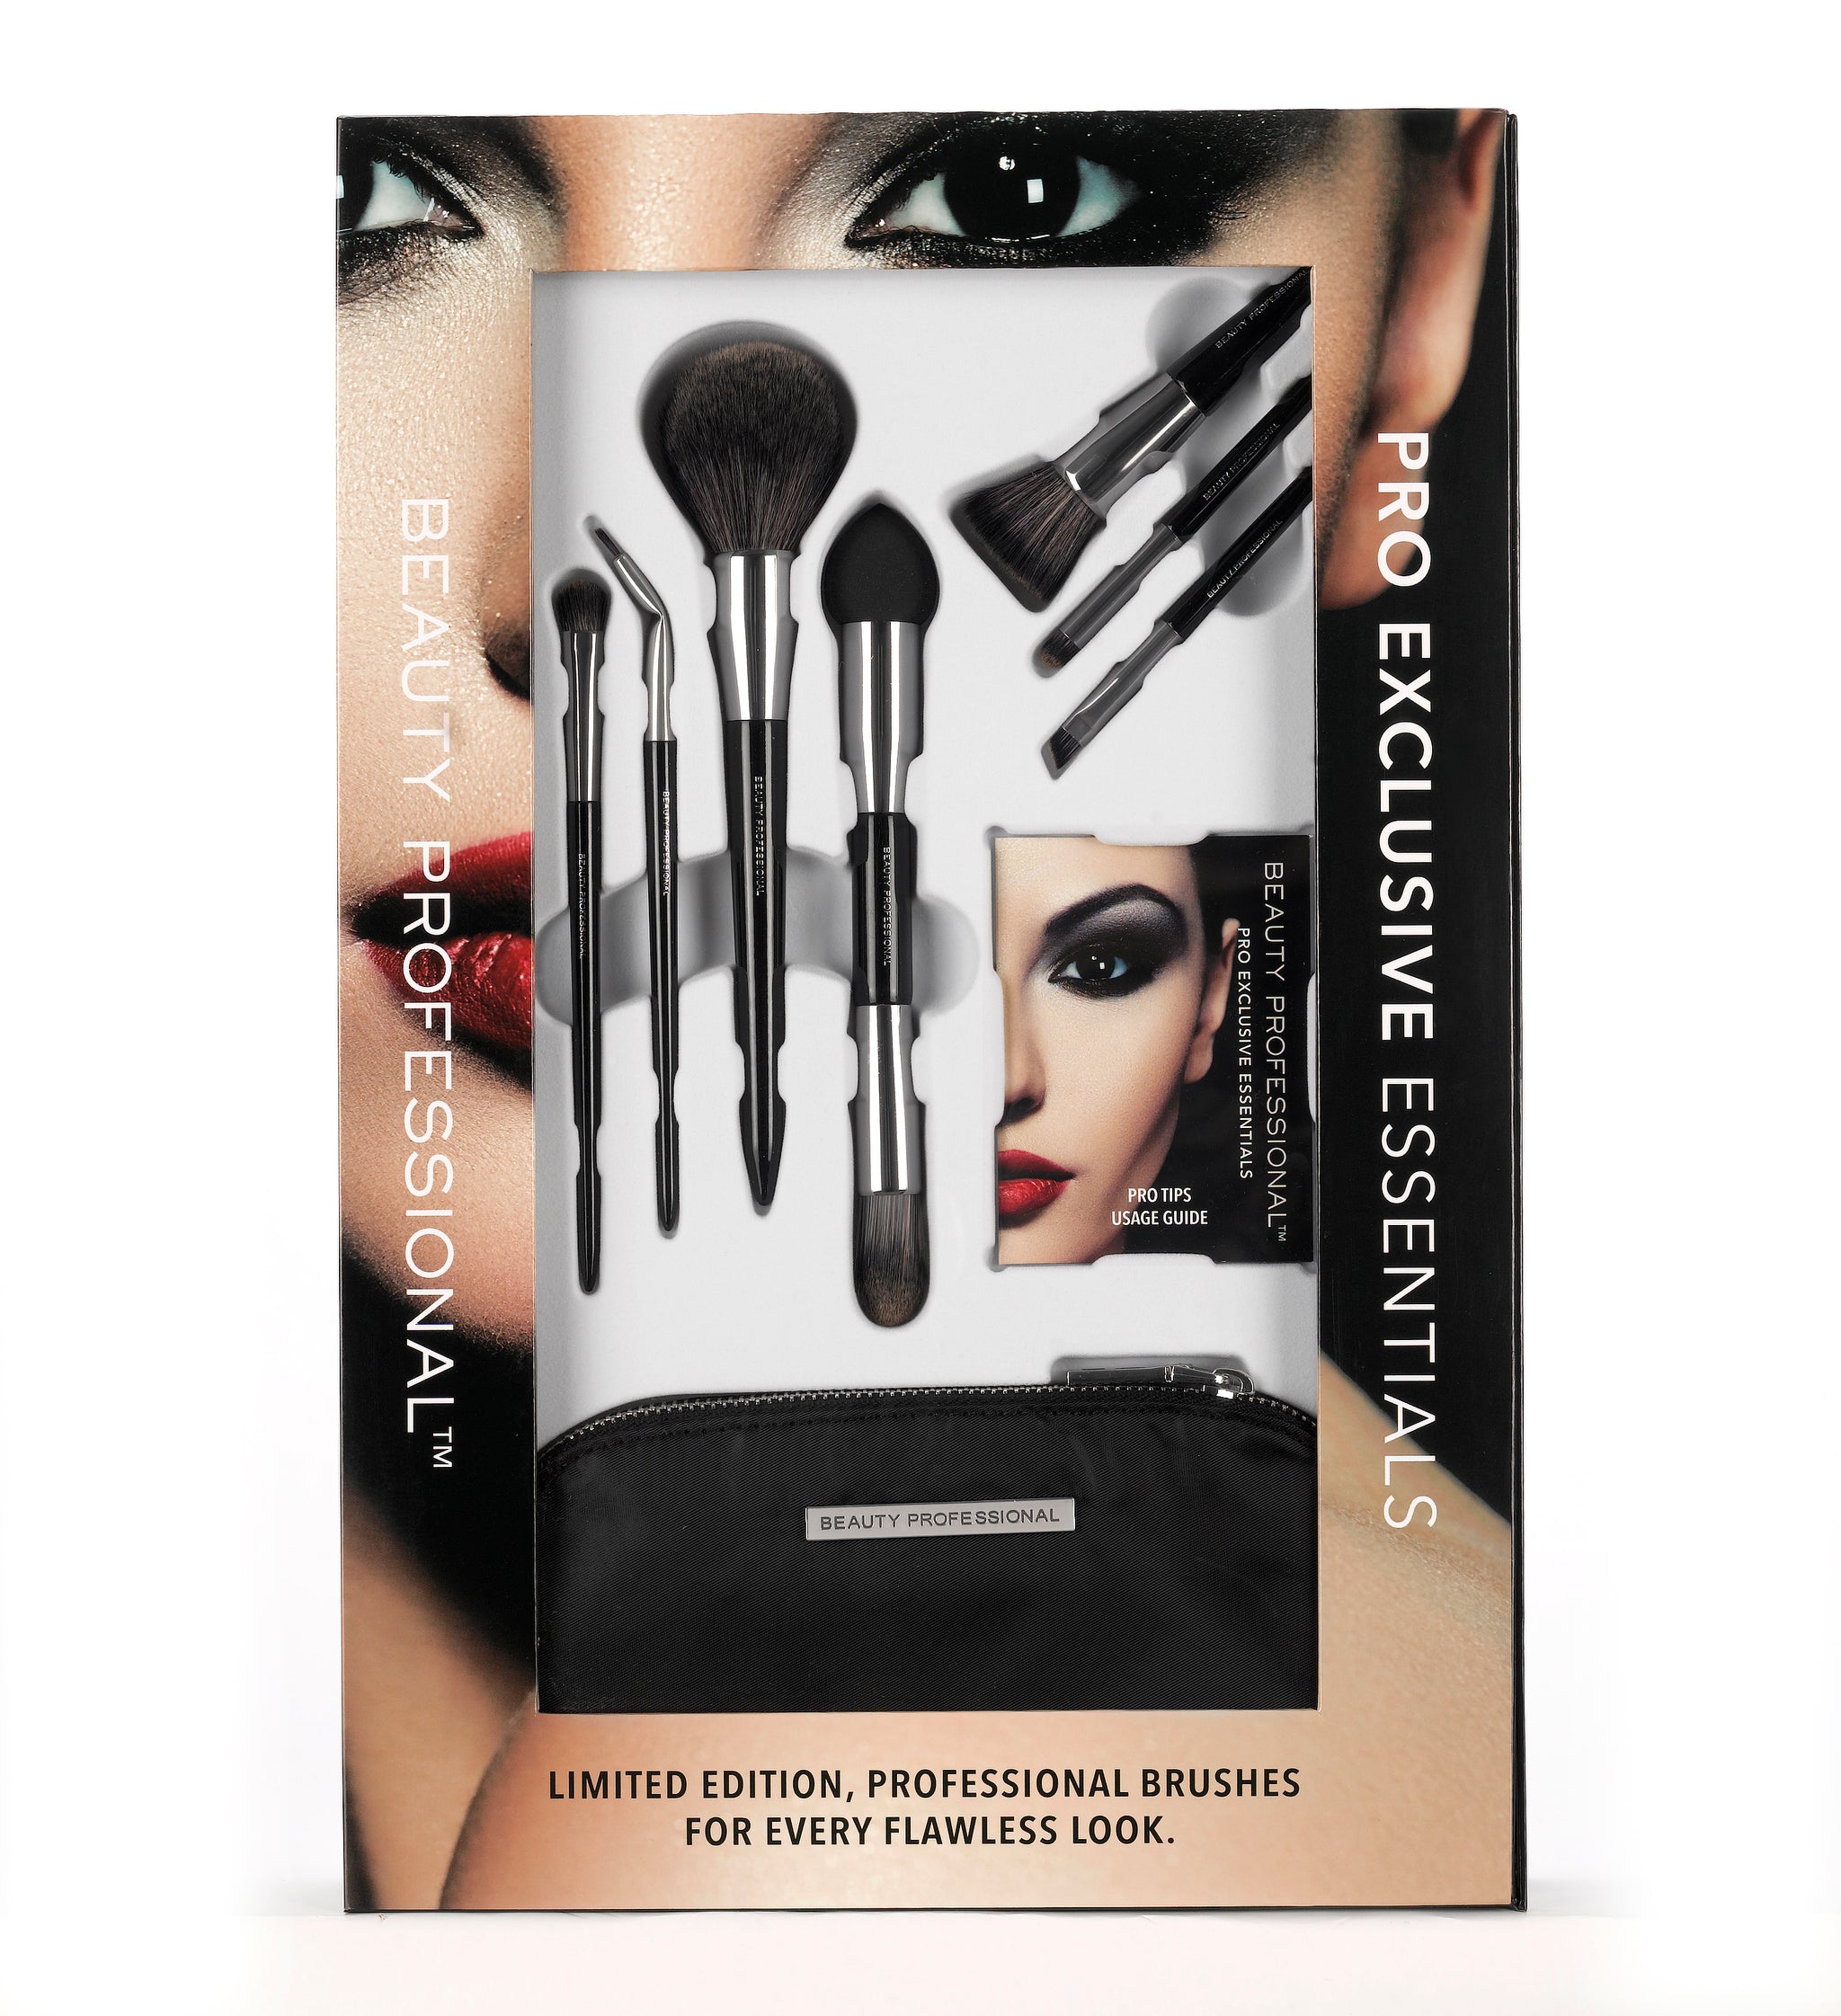 Kollegium Guinness wafer NEW PRO ESSENTIALS: A FULL AND TRAVEL-SIZED BRUSH SET | beautyprofessional